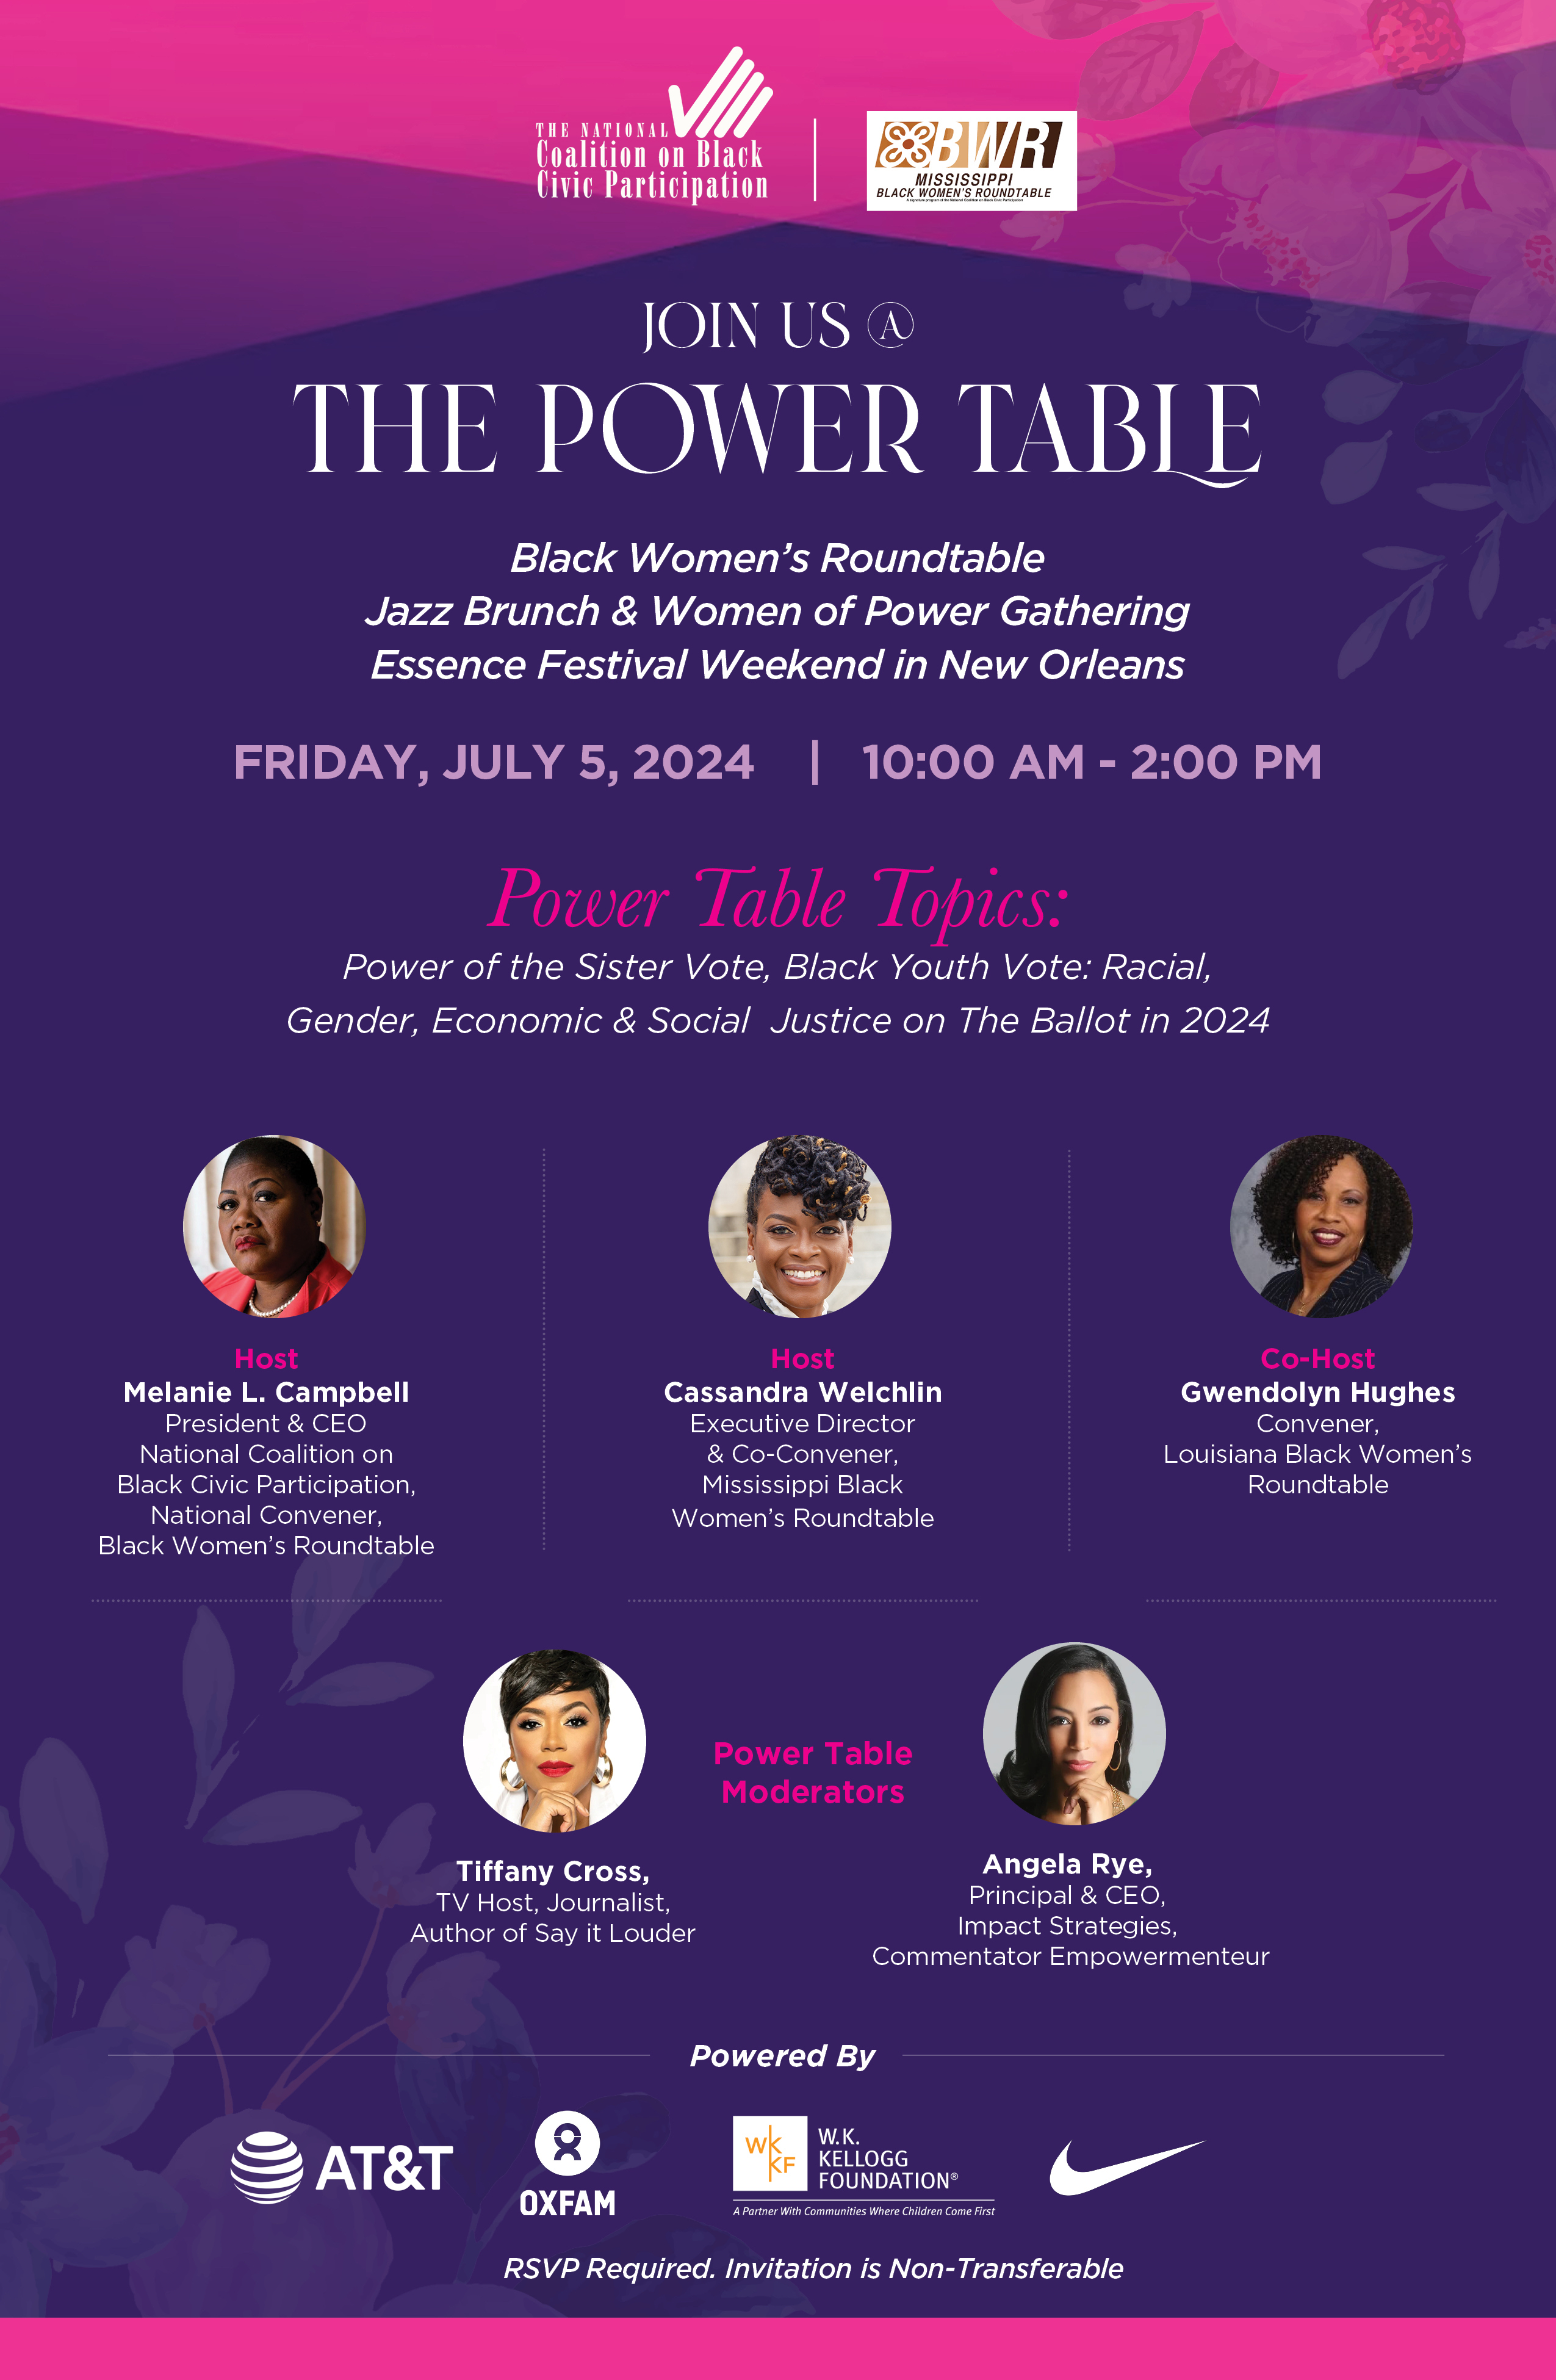 NCBCP and Black Women’s Roundtable, in Partnership with MS & LA Black Women’s Roundtable and to Host 10th Annual BWR Women of Power Gathering During Essence Festival 2024